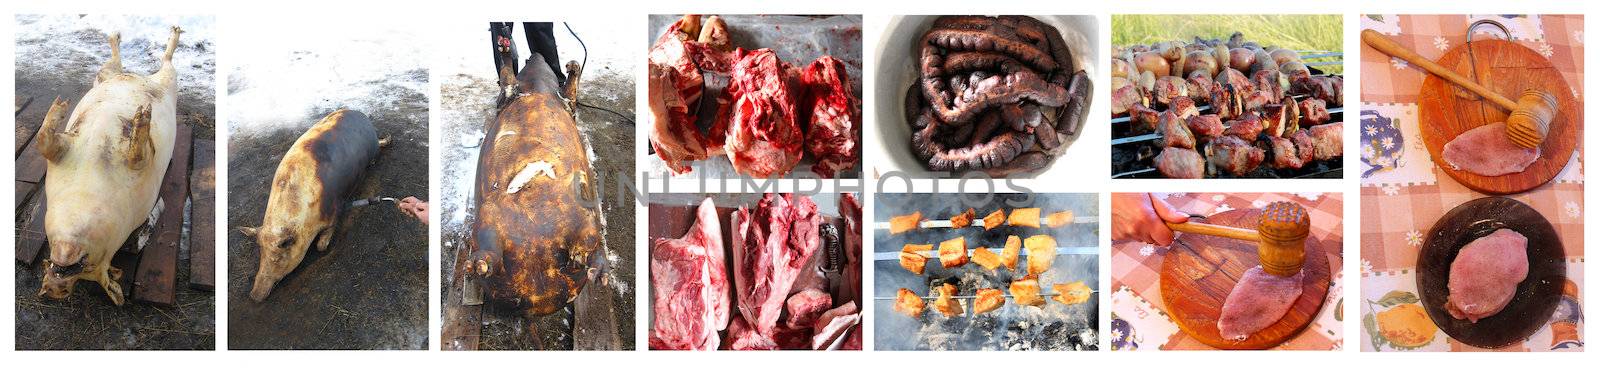 all stages of process whith passes meat from the slaughter to tasty fresh dish